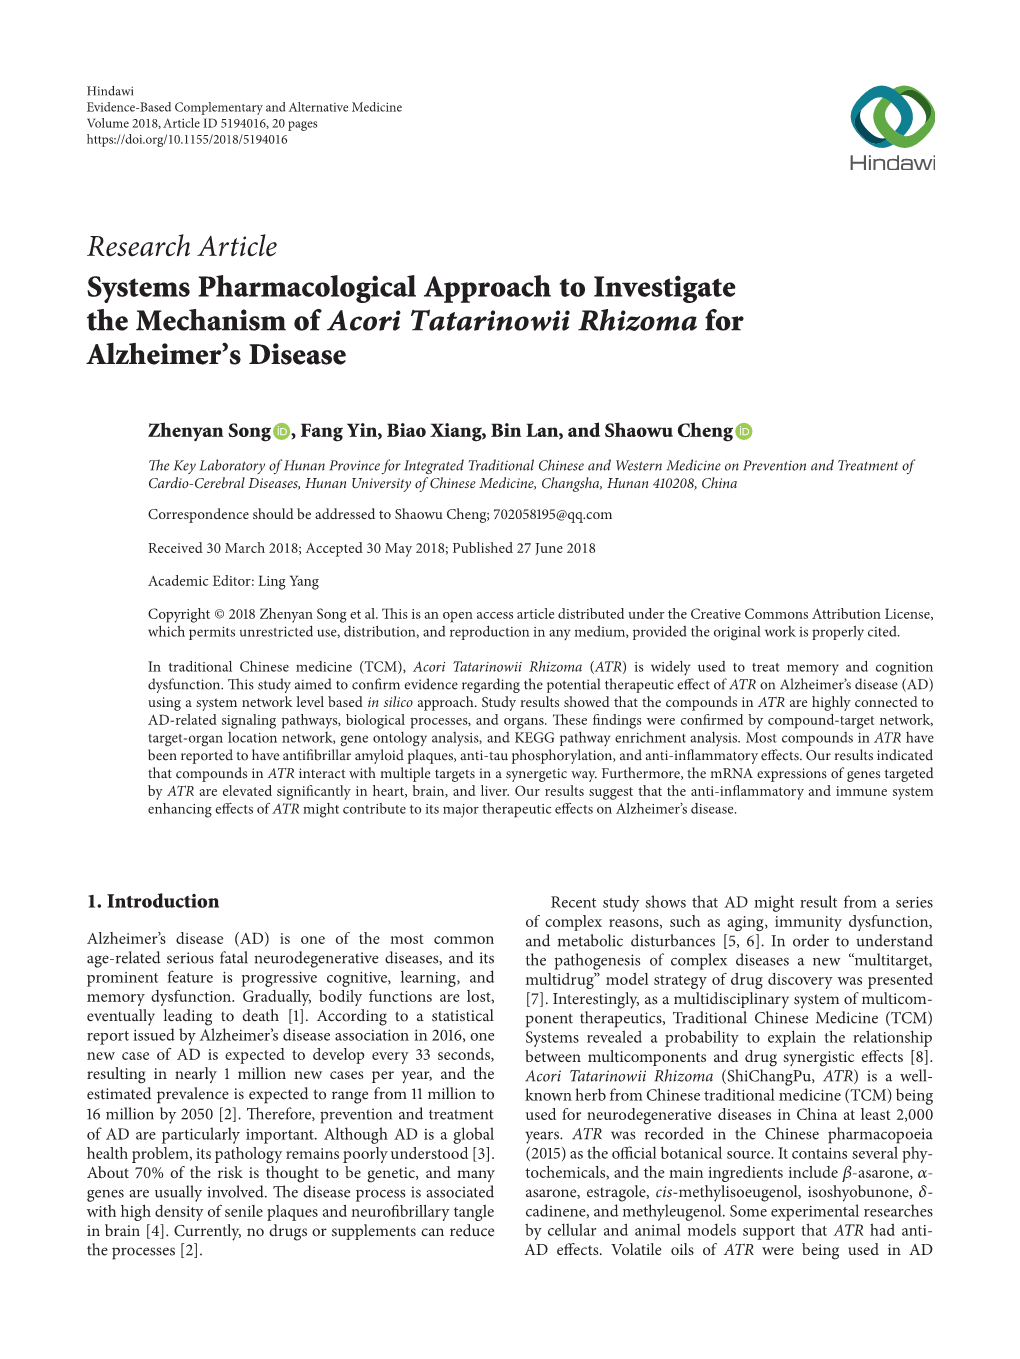 Systems Pharmacological Approach to Investigate the Mechanism of Acori Tatarinowii Rhizoma for Alzheimer’S Disease